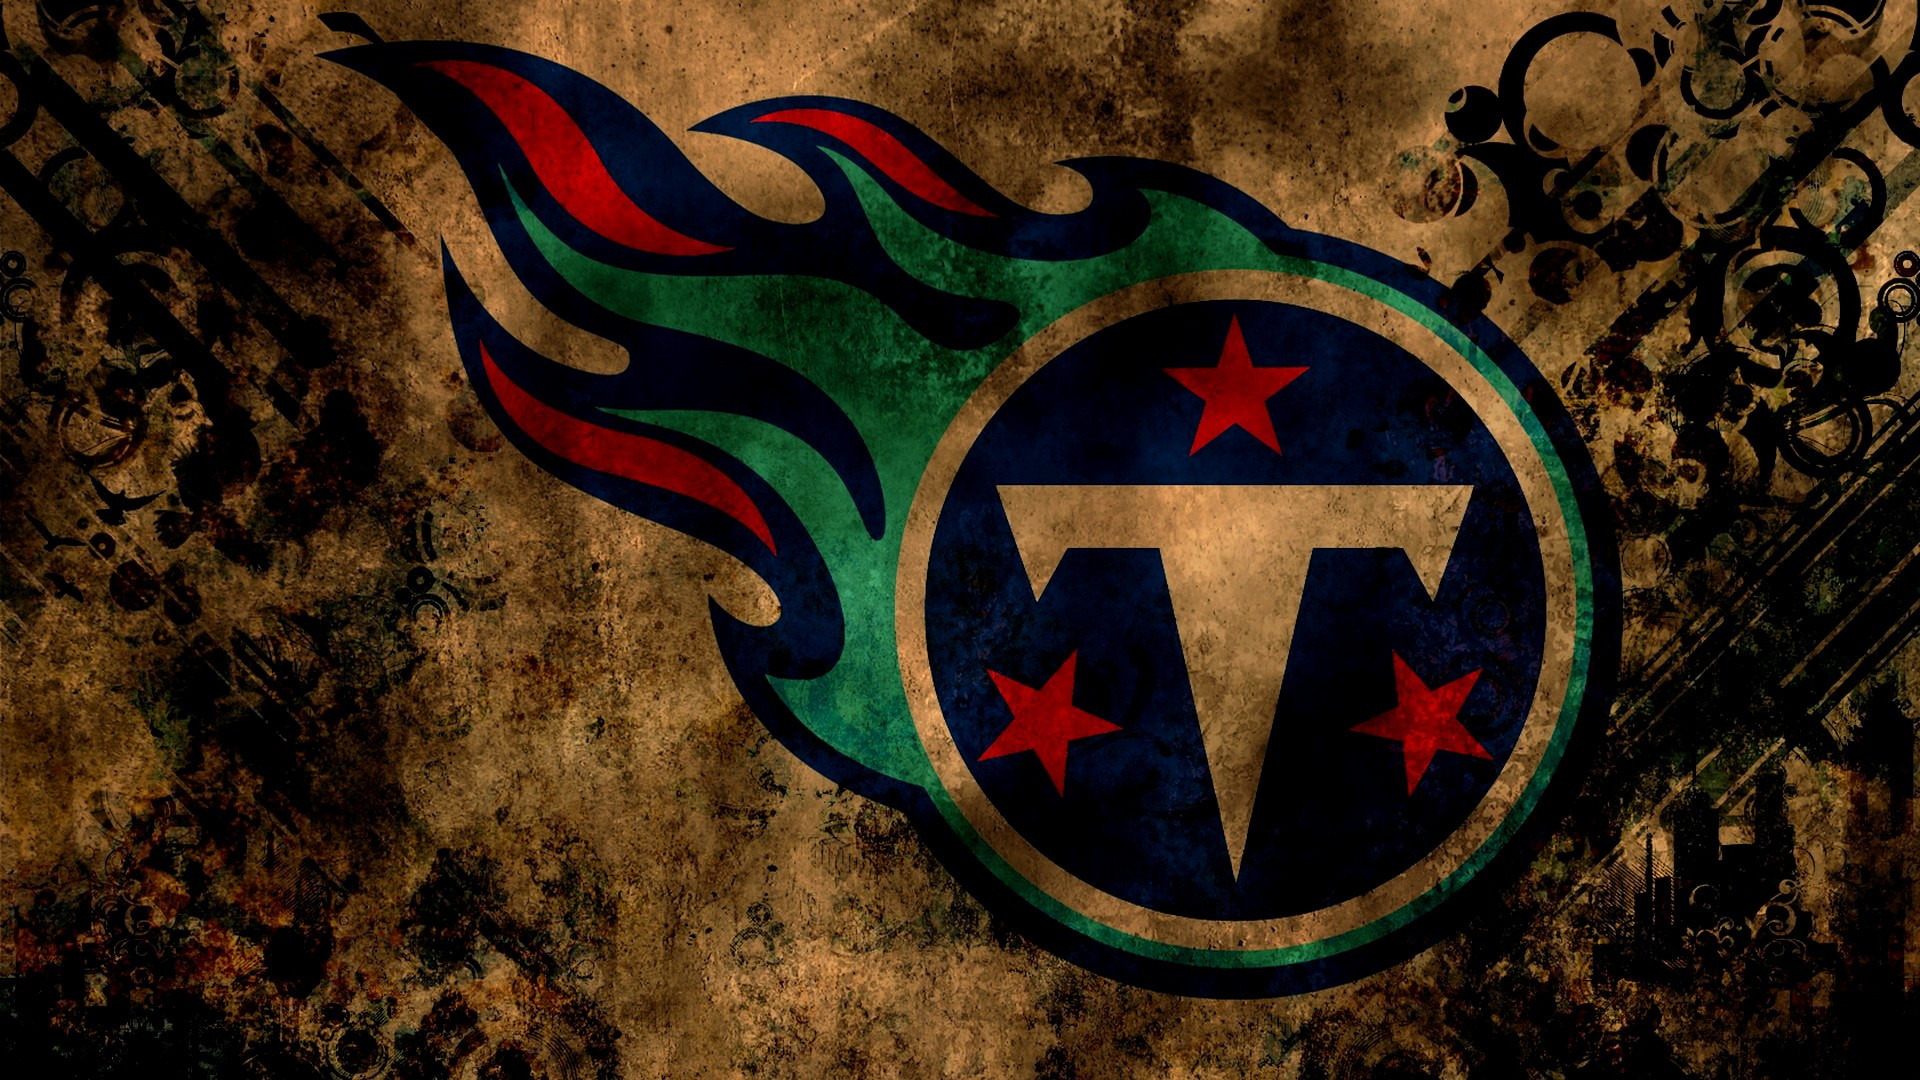 Best Tennessee Titans Wallpaper in HD with high-resolution 1920x1080 pixel. You can use and set as wallpaper for Notebook Screensavers, Mac Wallpapers, Mobile Home Screen, iPhone or Android Phones Lock Screen